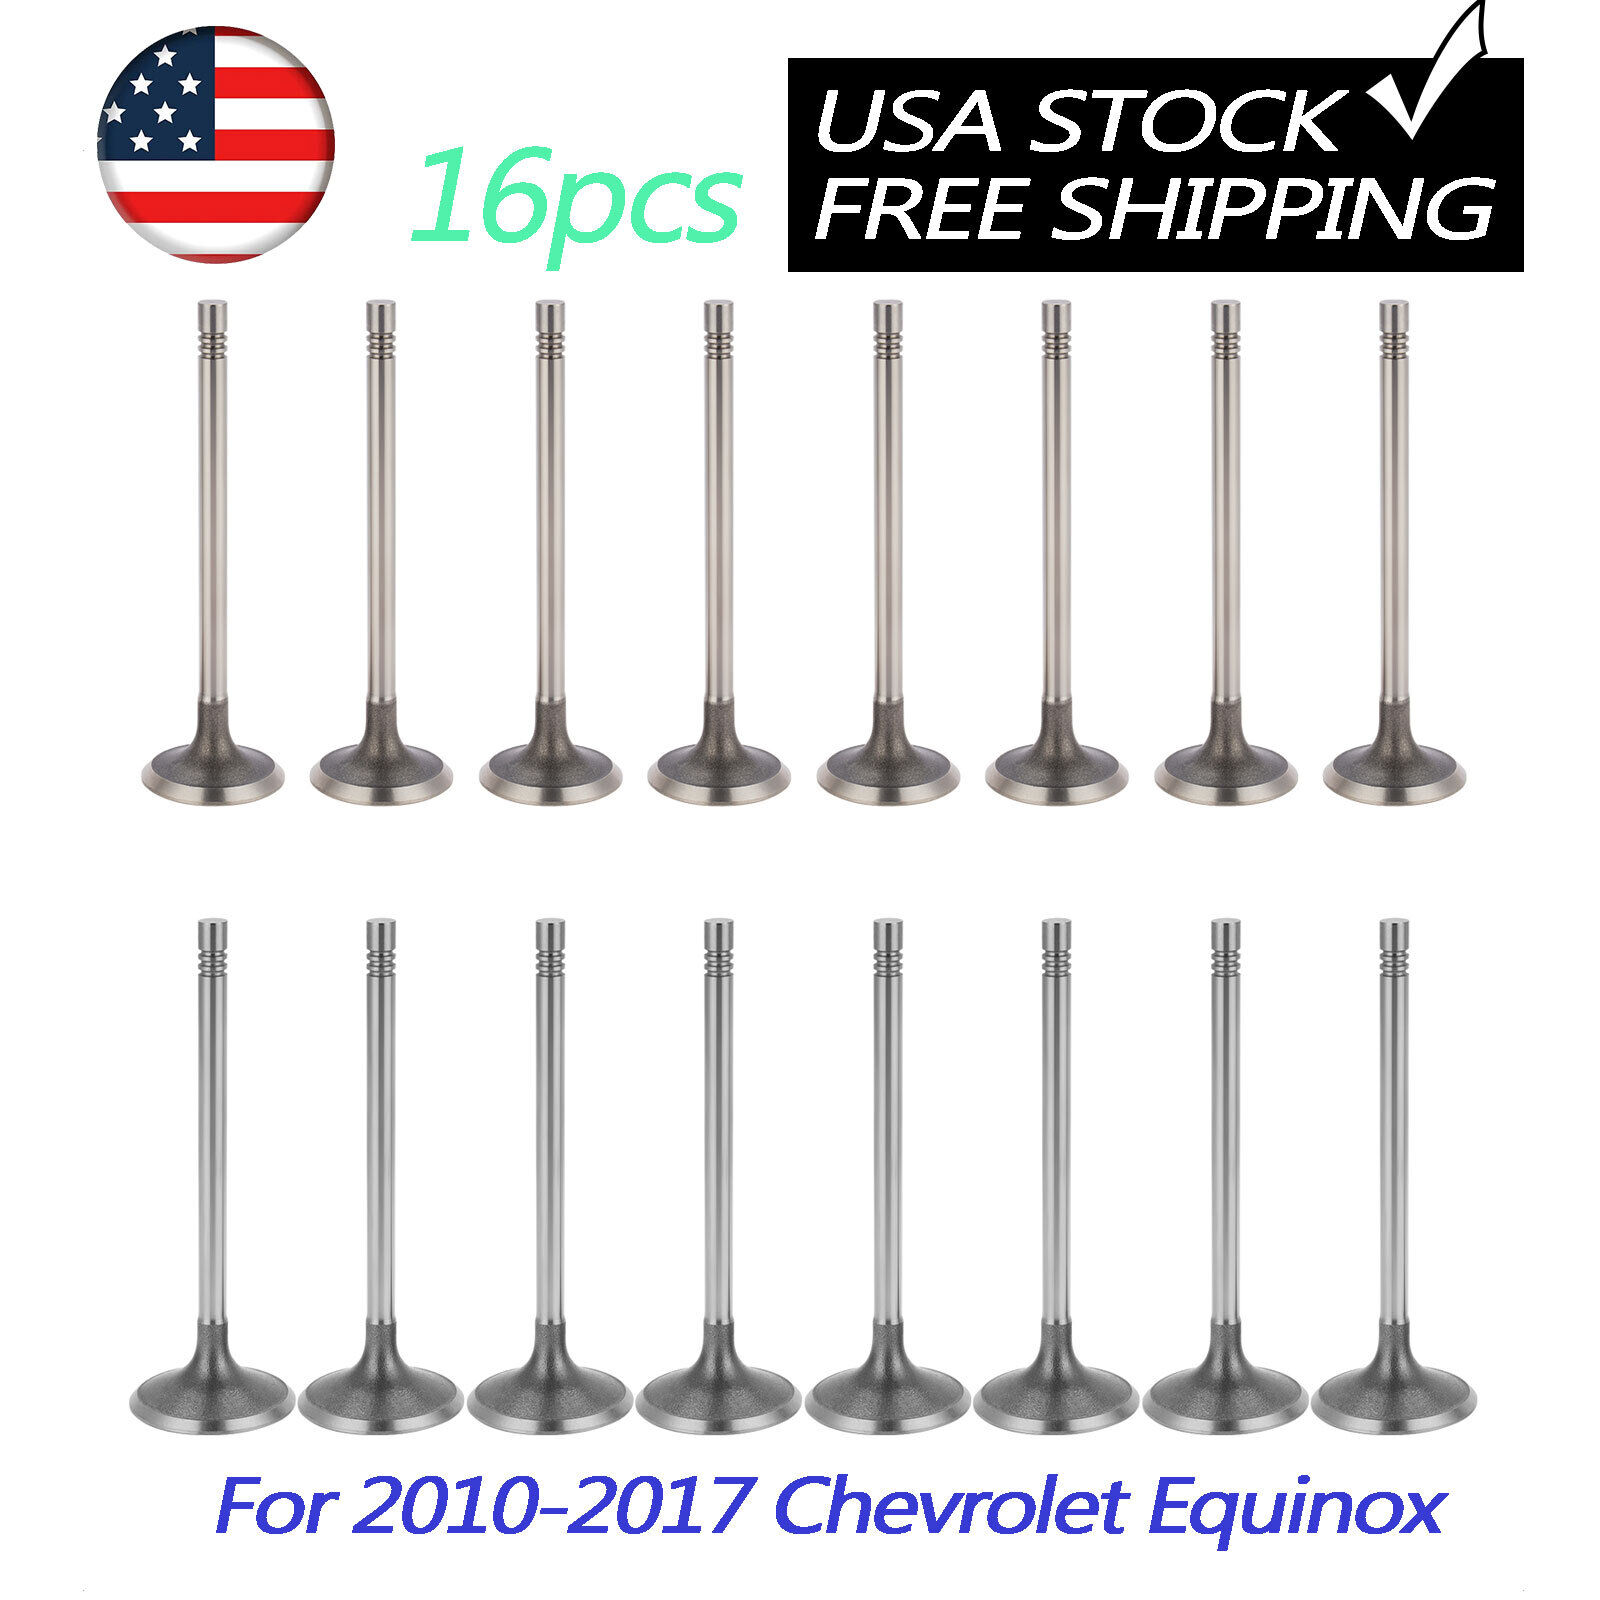 Cylinder Head Intake and Exhaust Valve Kit Fits For 2010-2017 Chevrolet Equinox